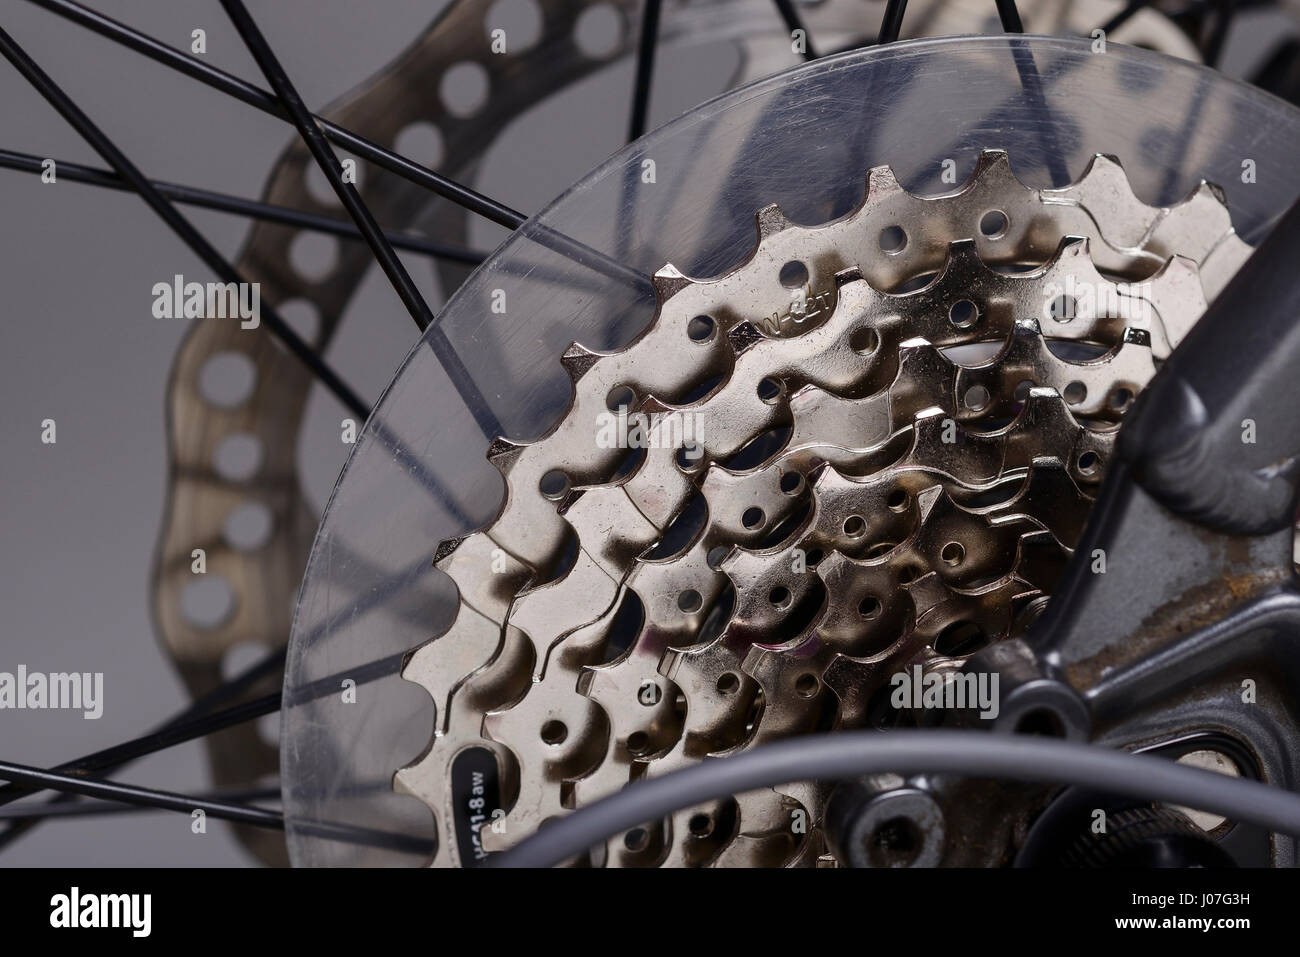 Close up of a gear cassette on a bicycle. Stock Photo